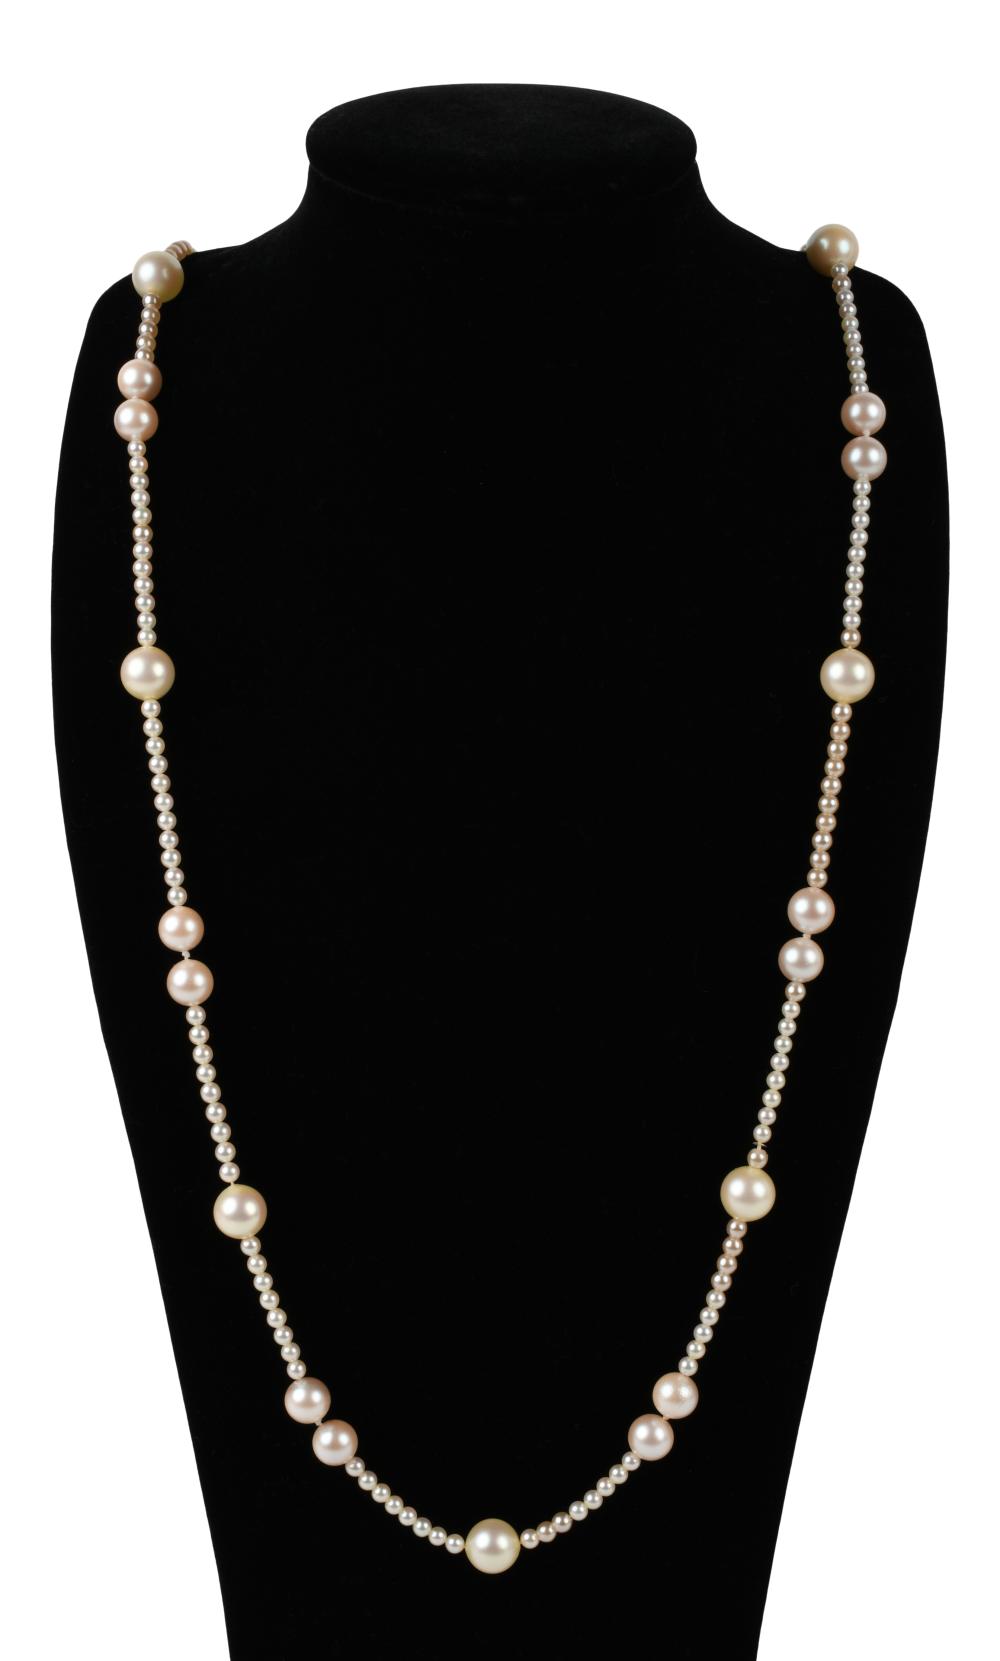 14K YELLOW GOLD PEARL NECKLACE 33db08